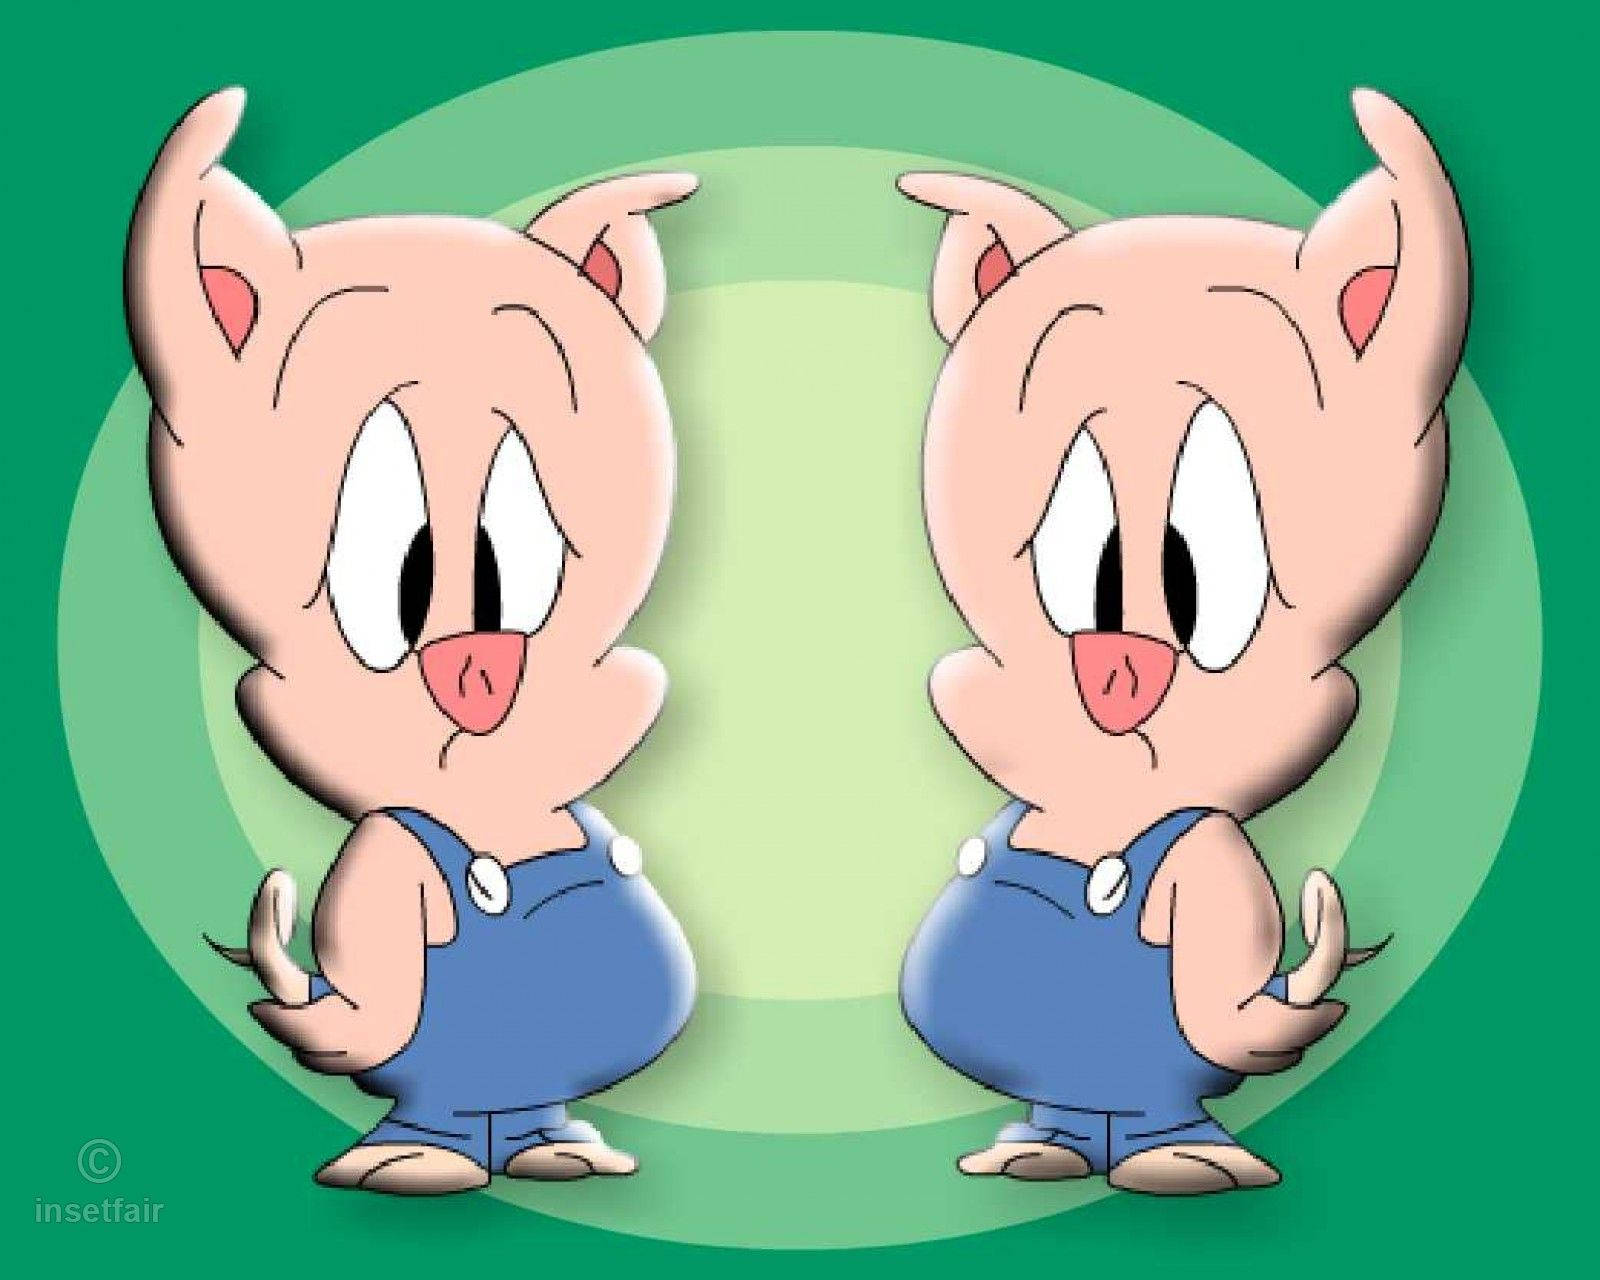 Porky Pig Fictional Character Background